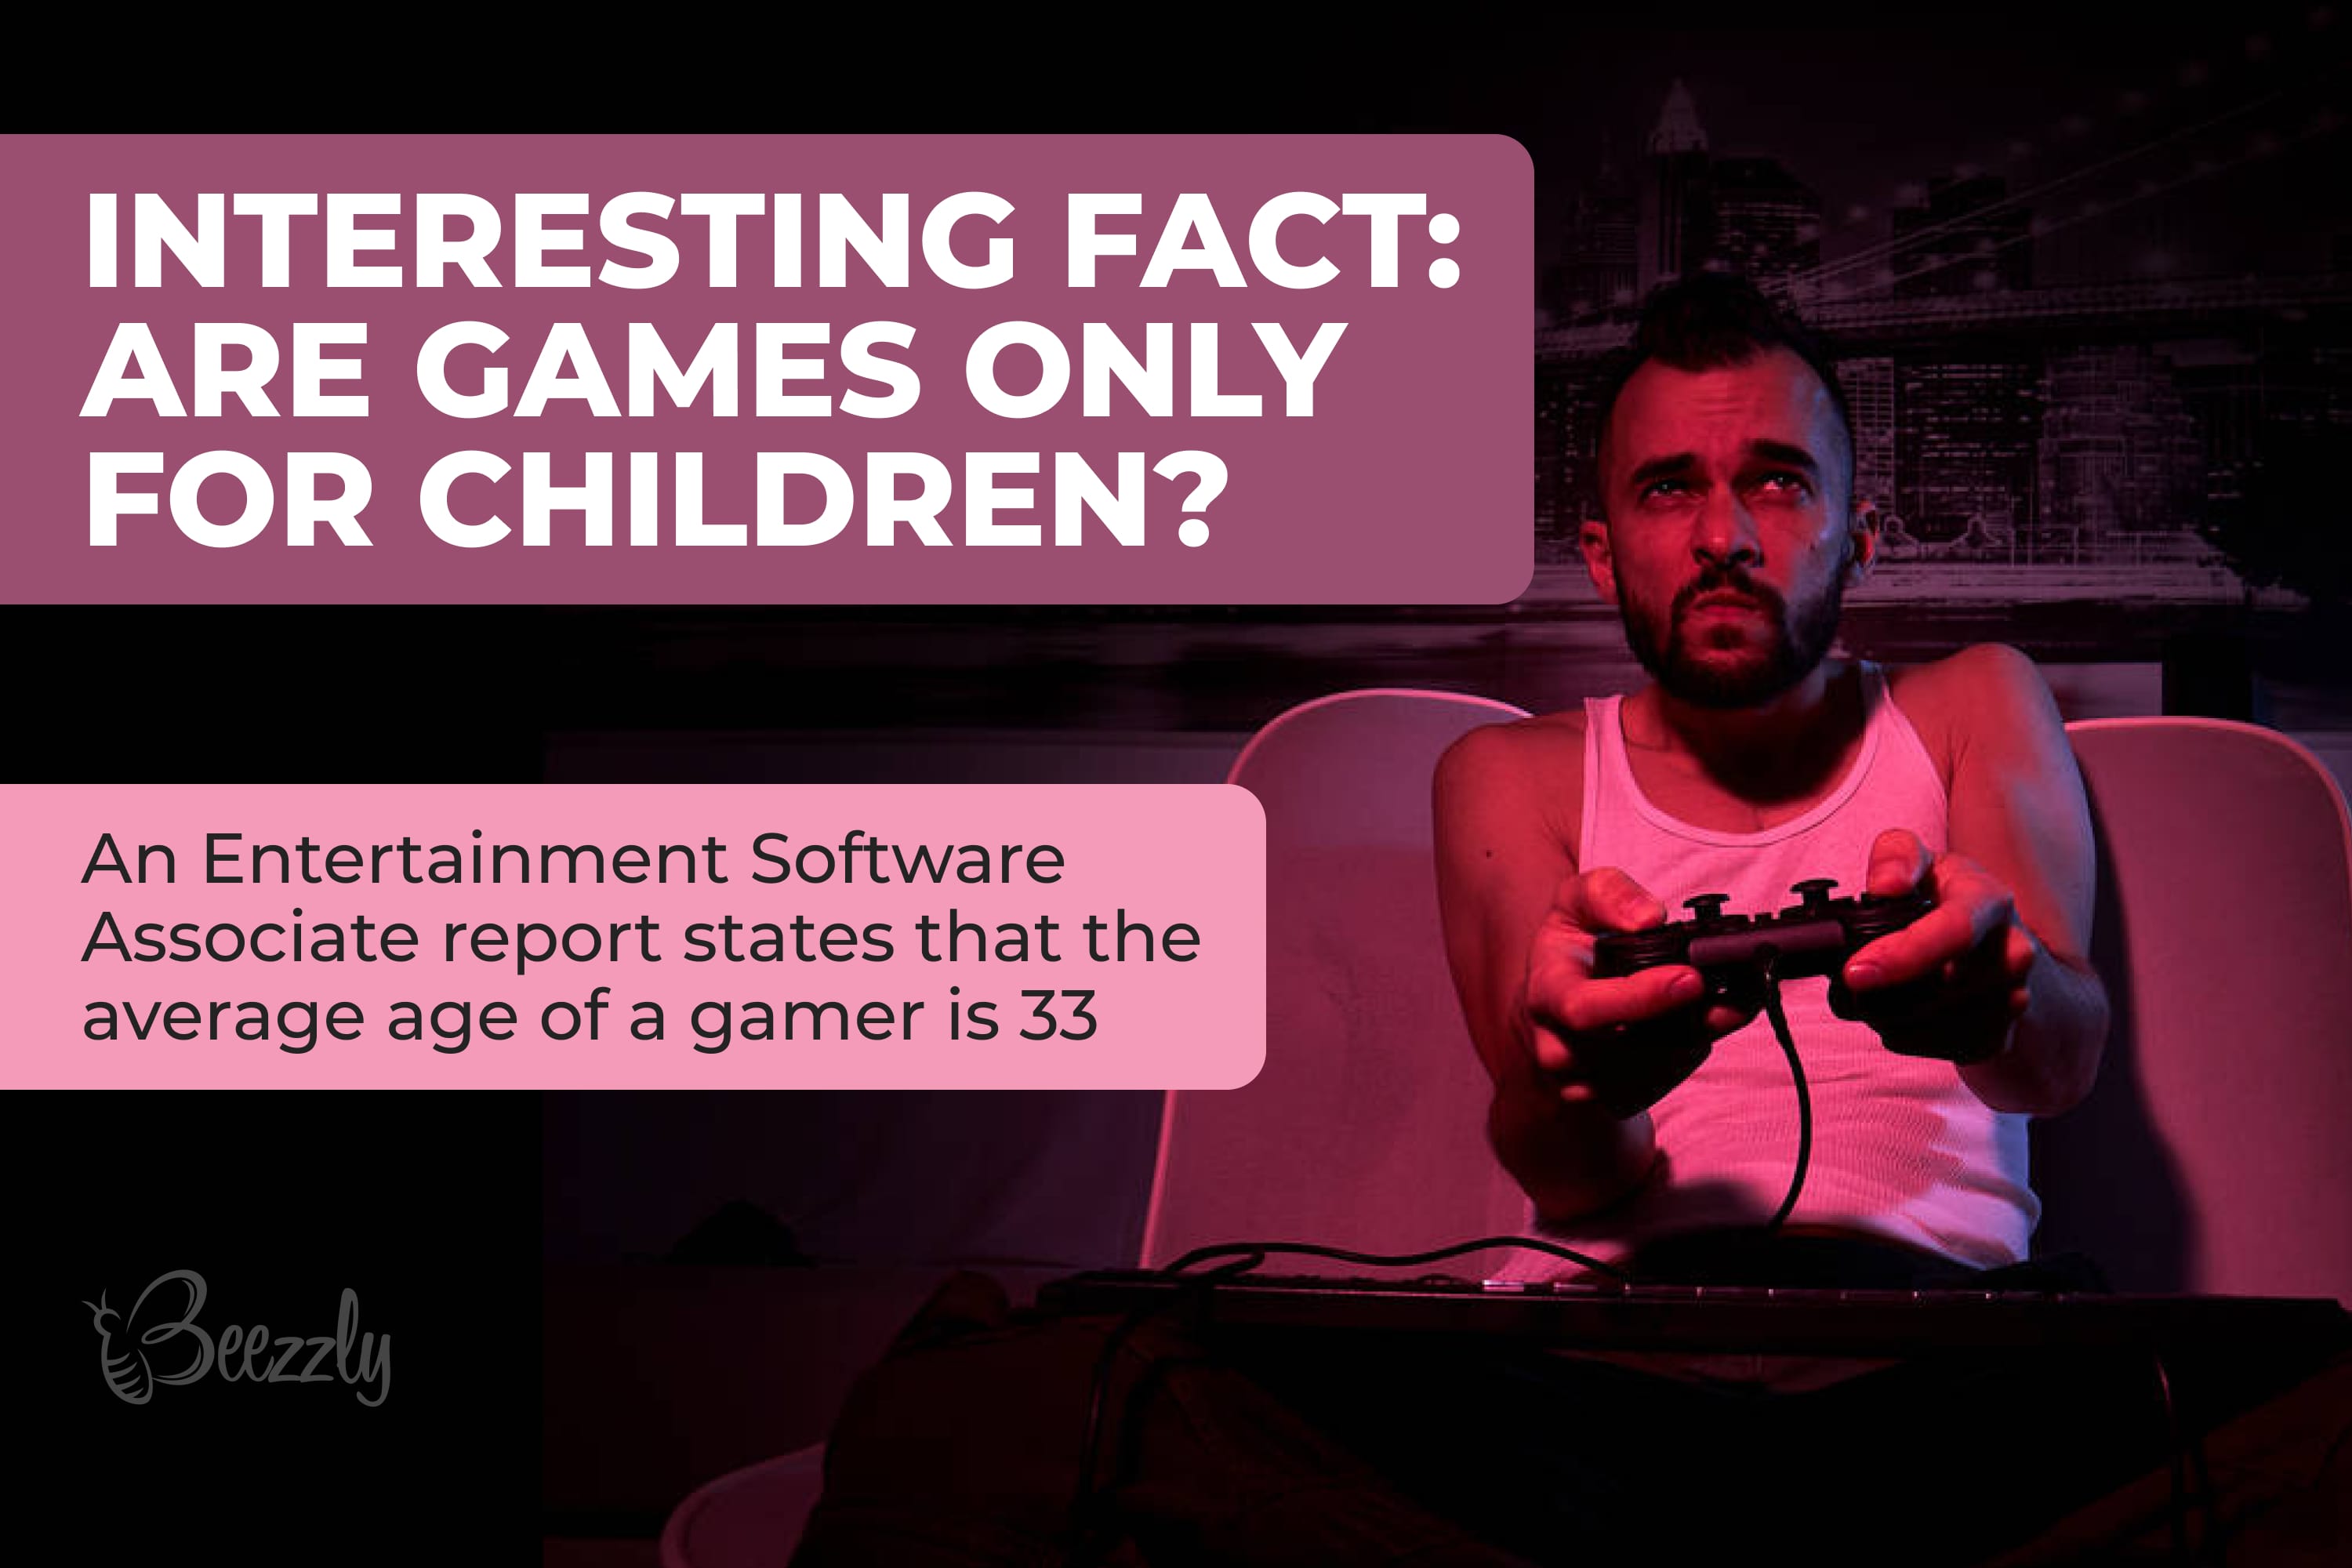 Are games only for children